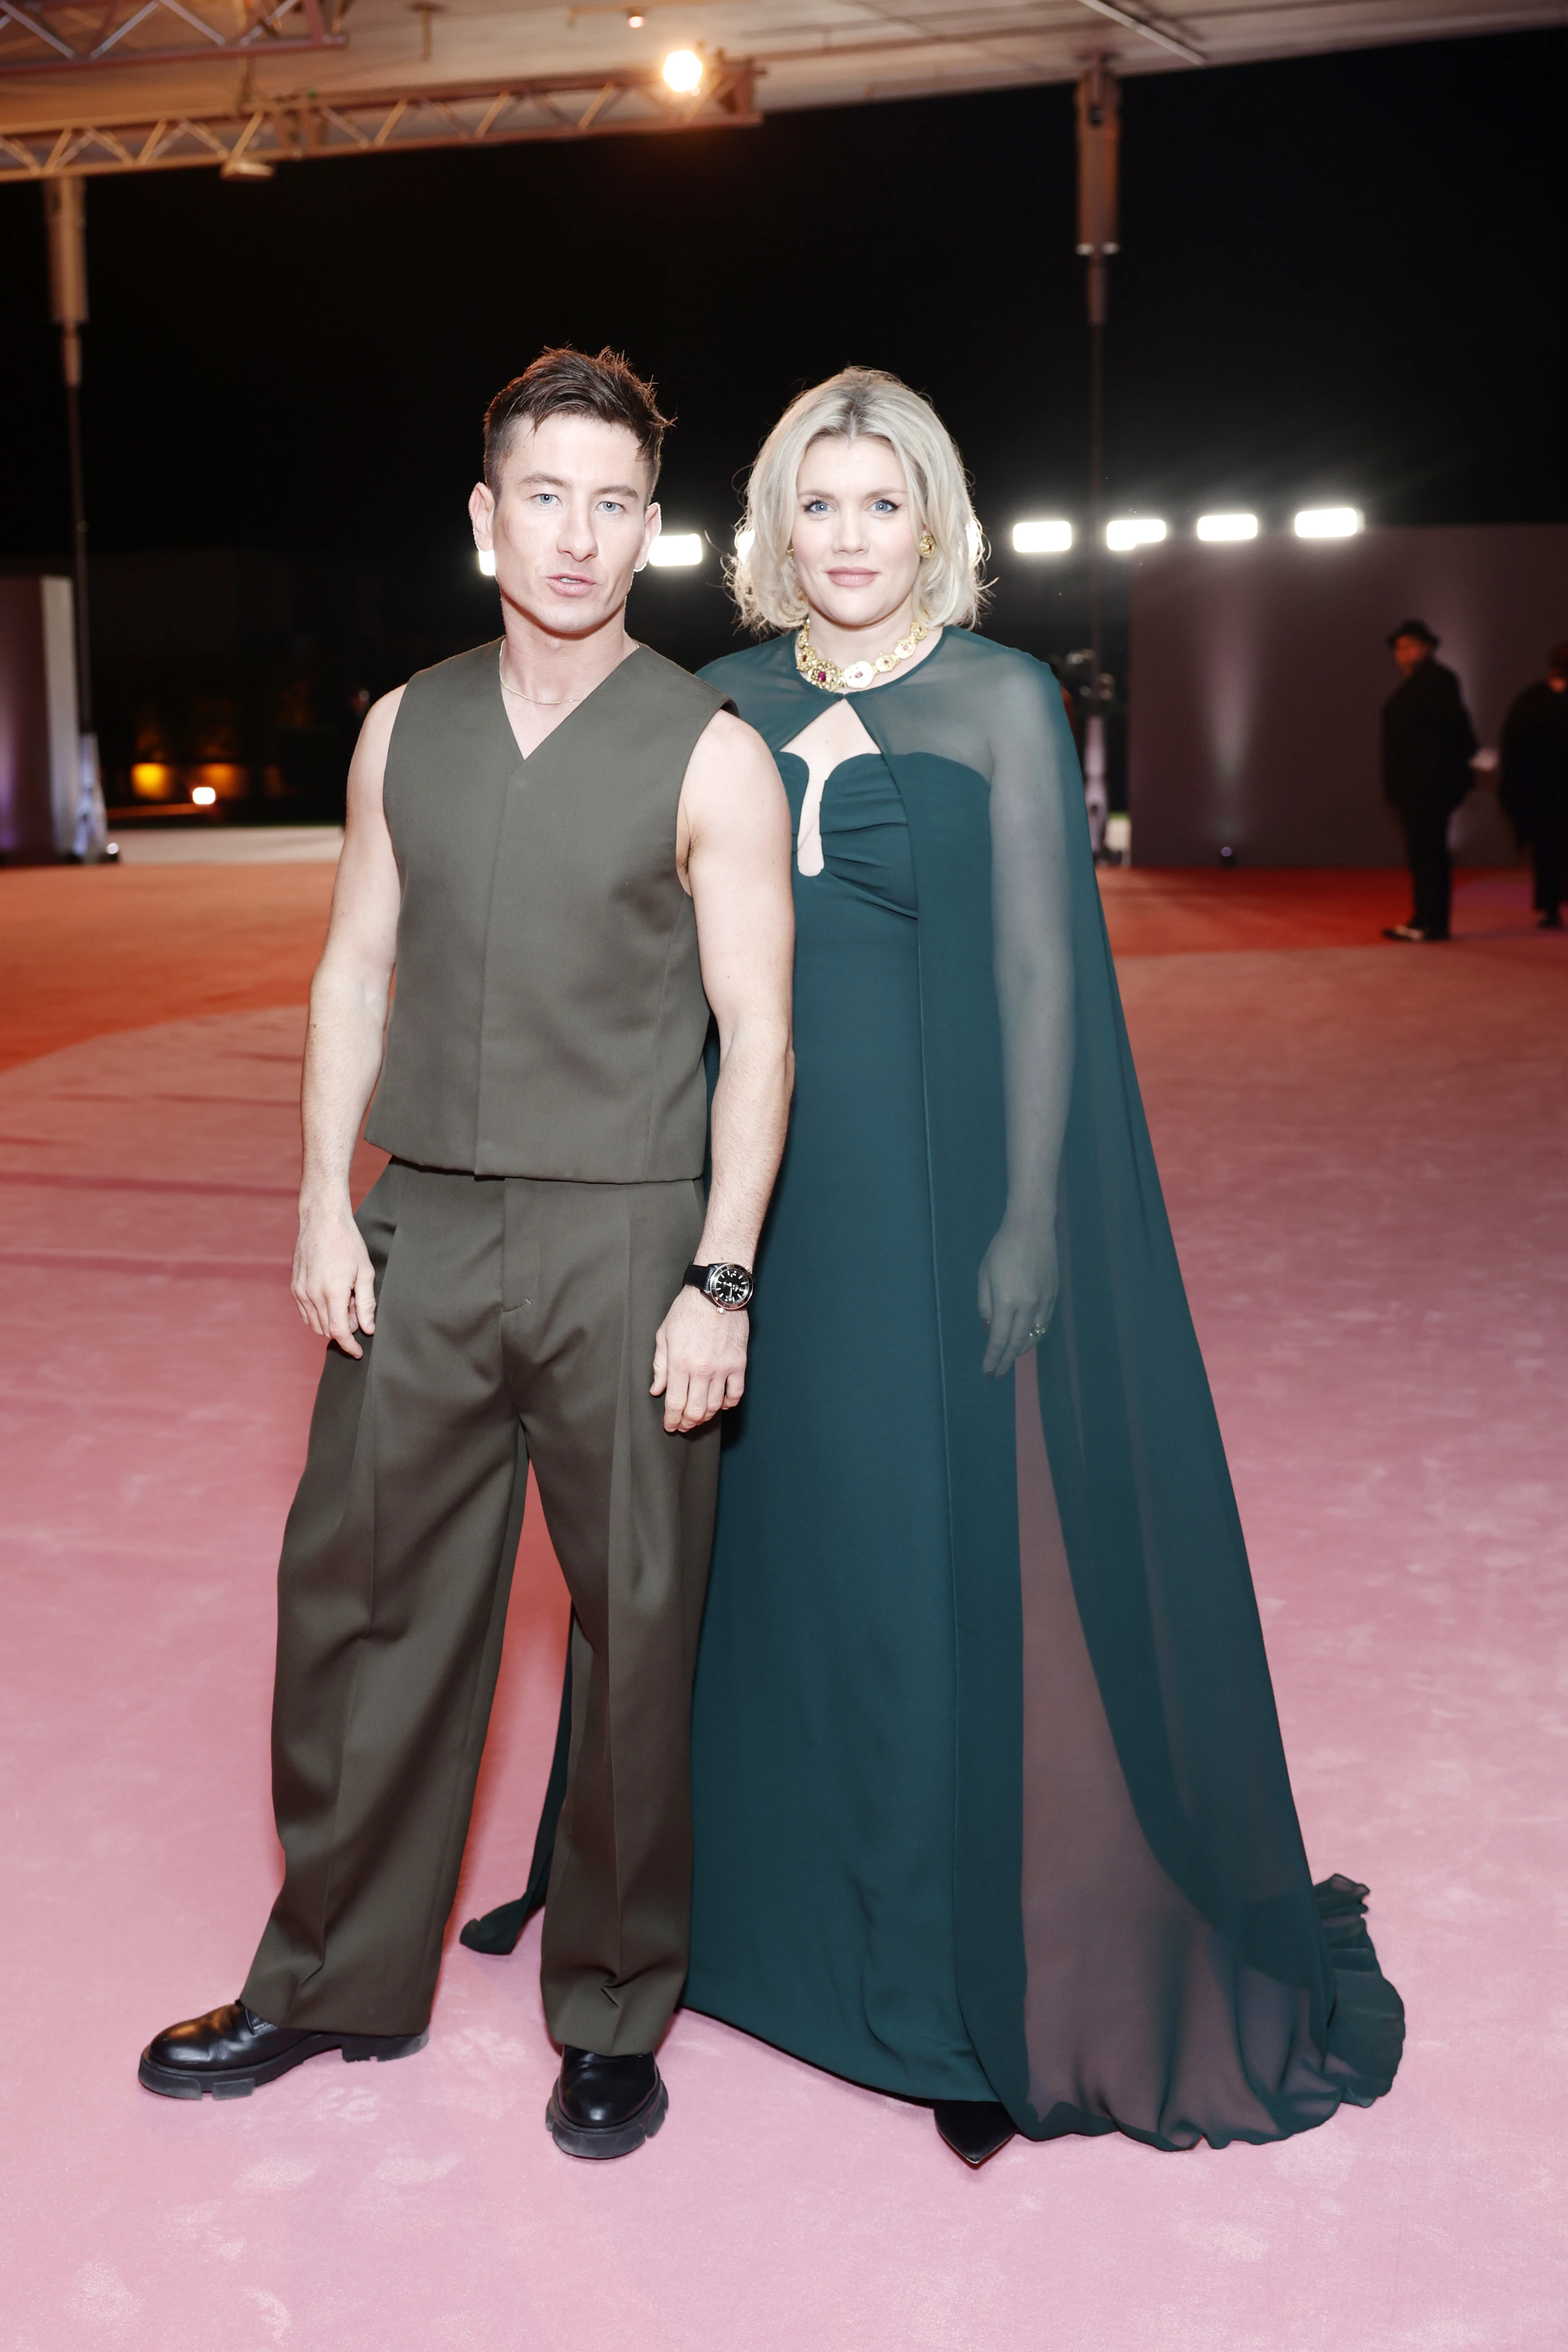 Barry Keoghan and Emerald Fennell 